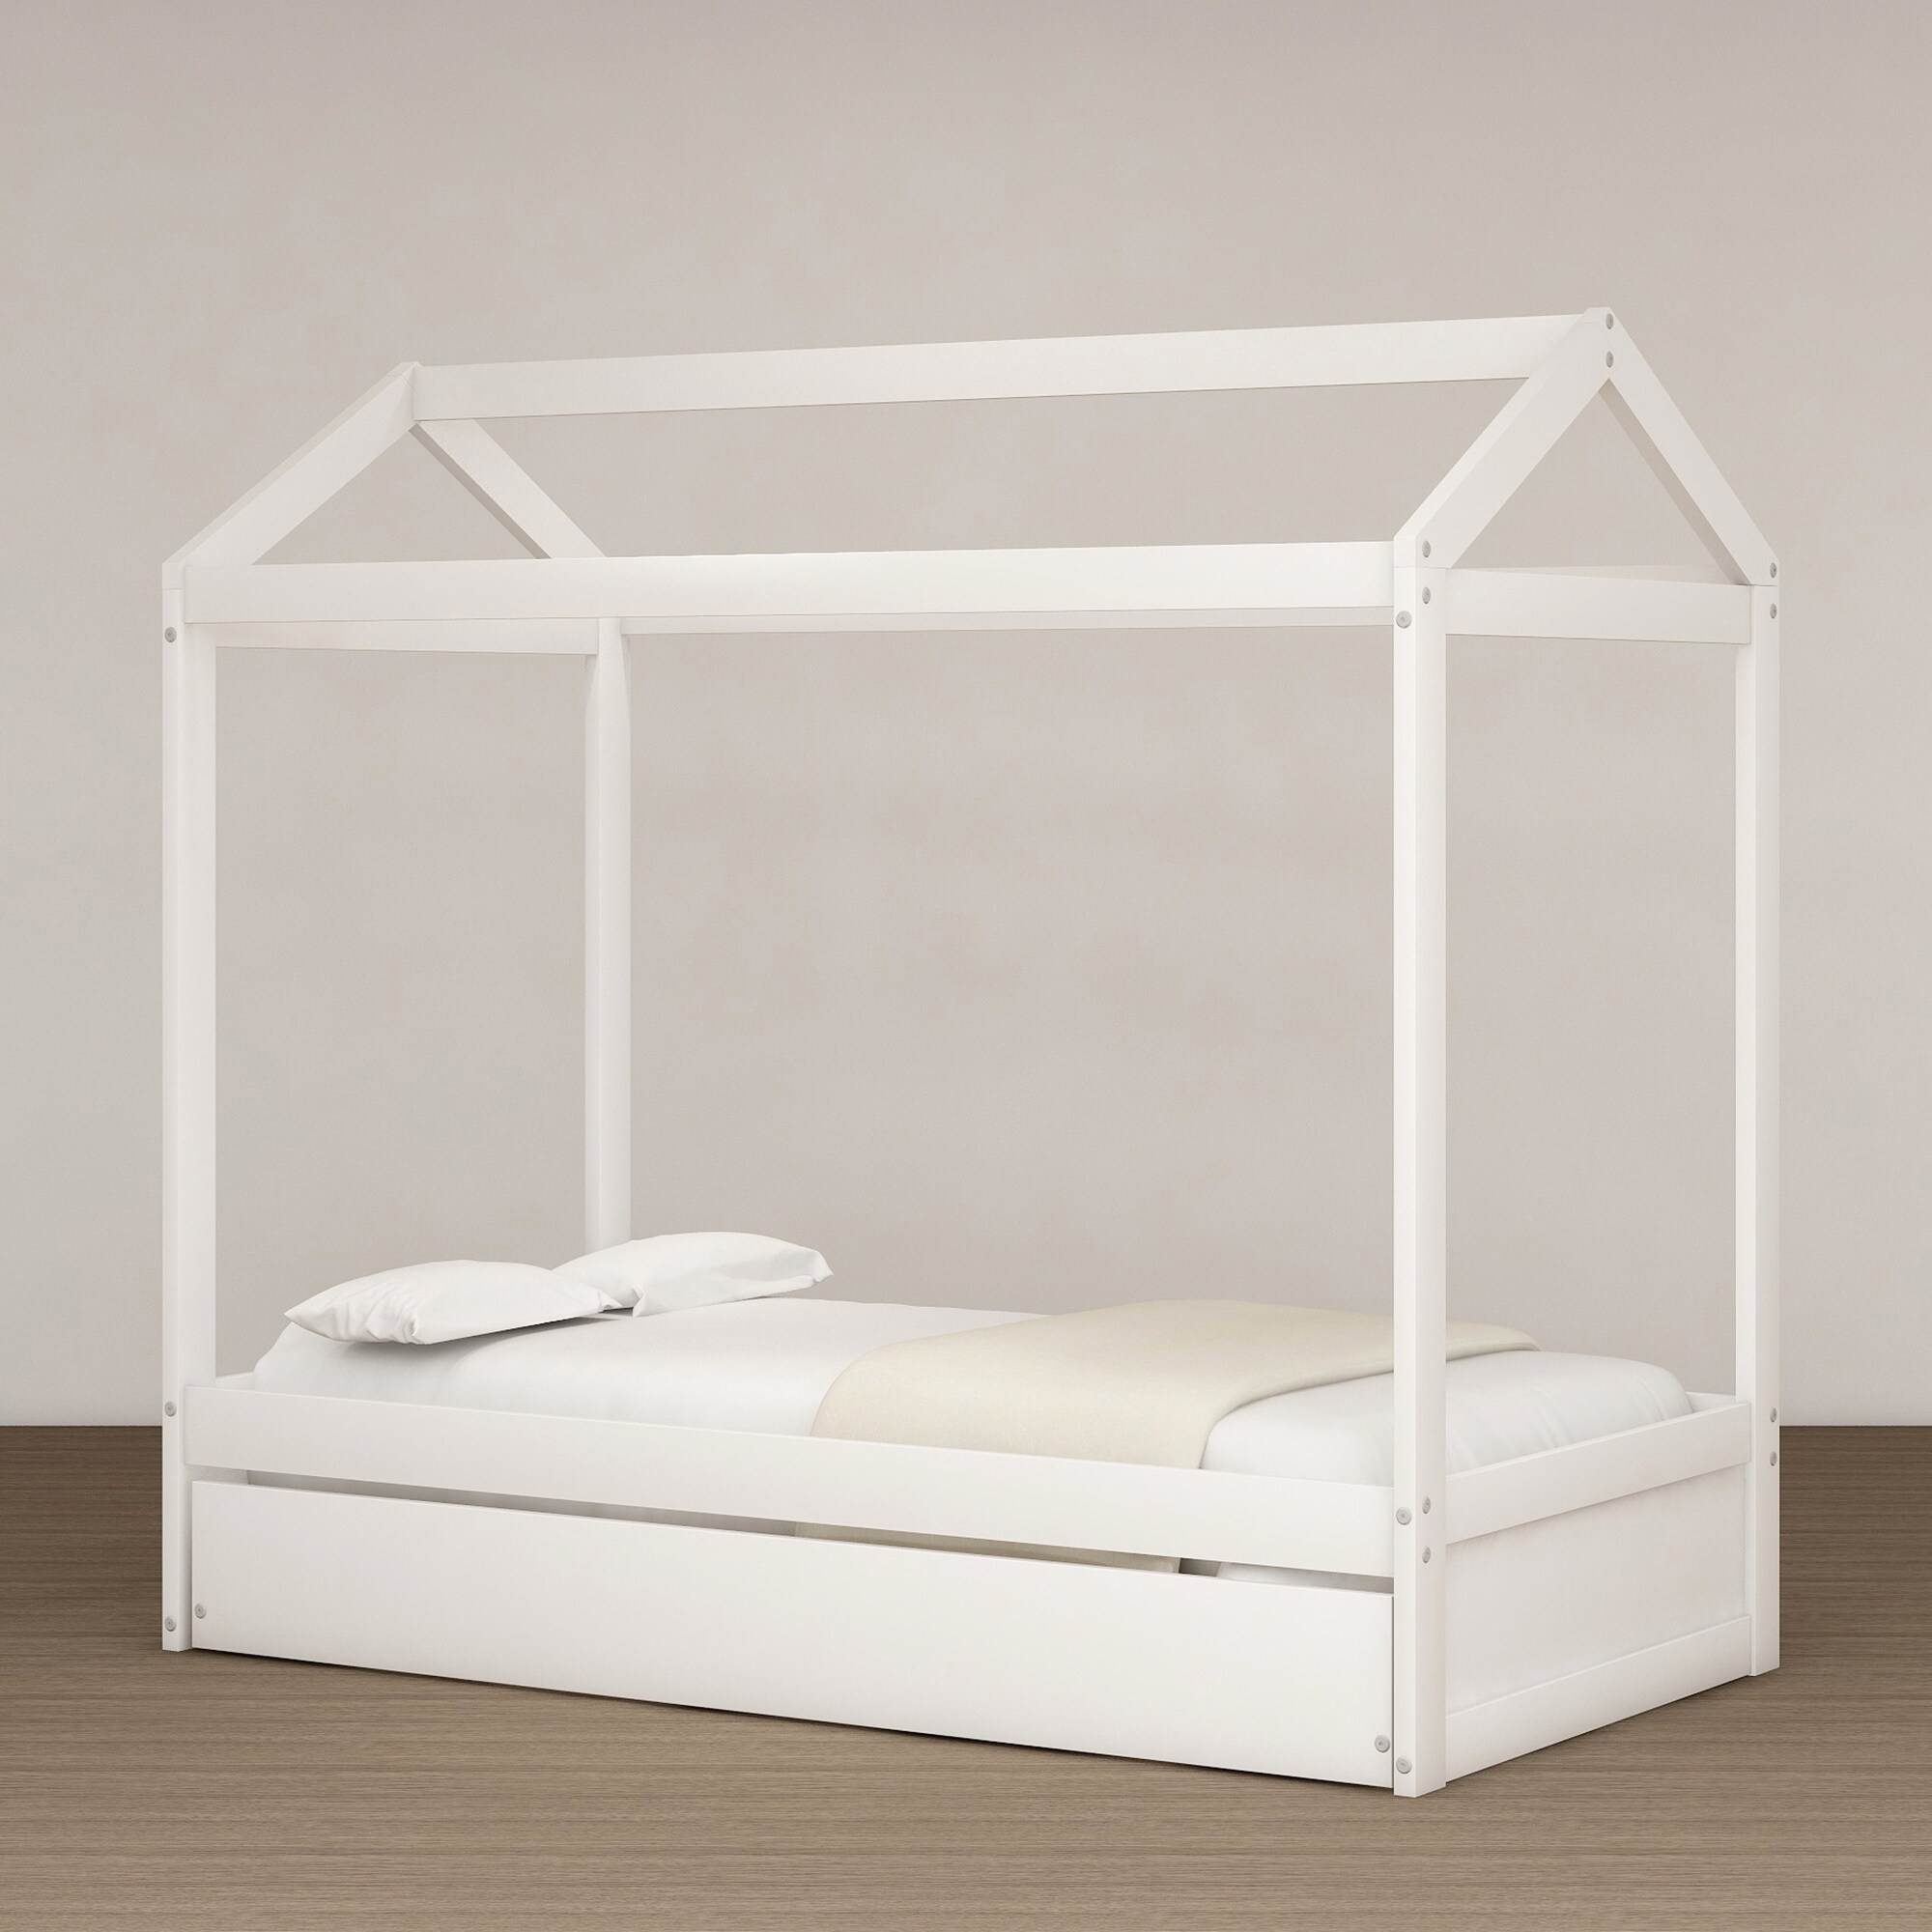 Twin Size House Bed with Twin Trundle, Customizable for Kids to Express Their Own Themes, Canopy Bed Made of Solid Wood